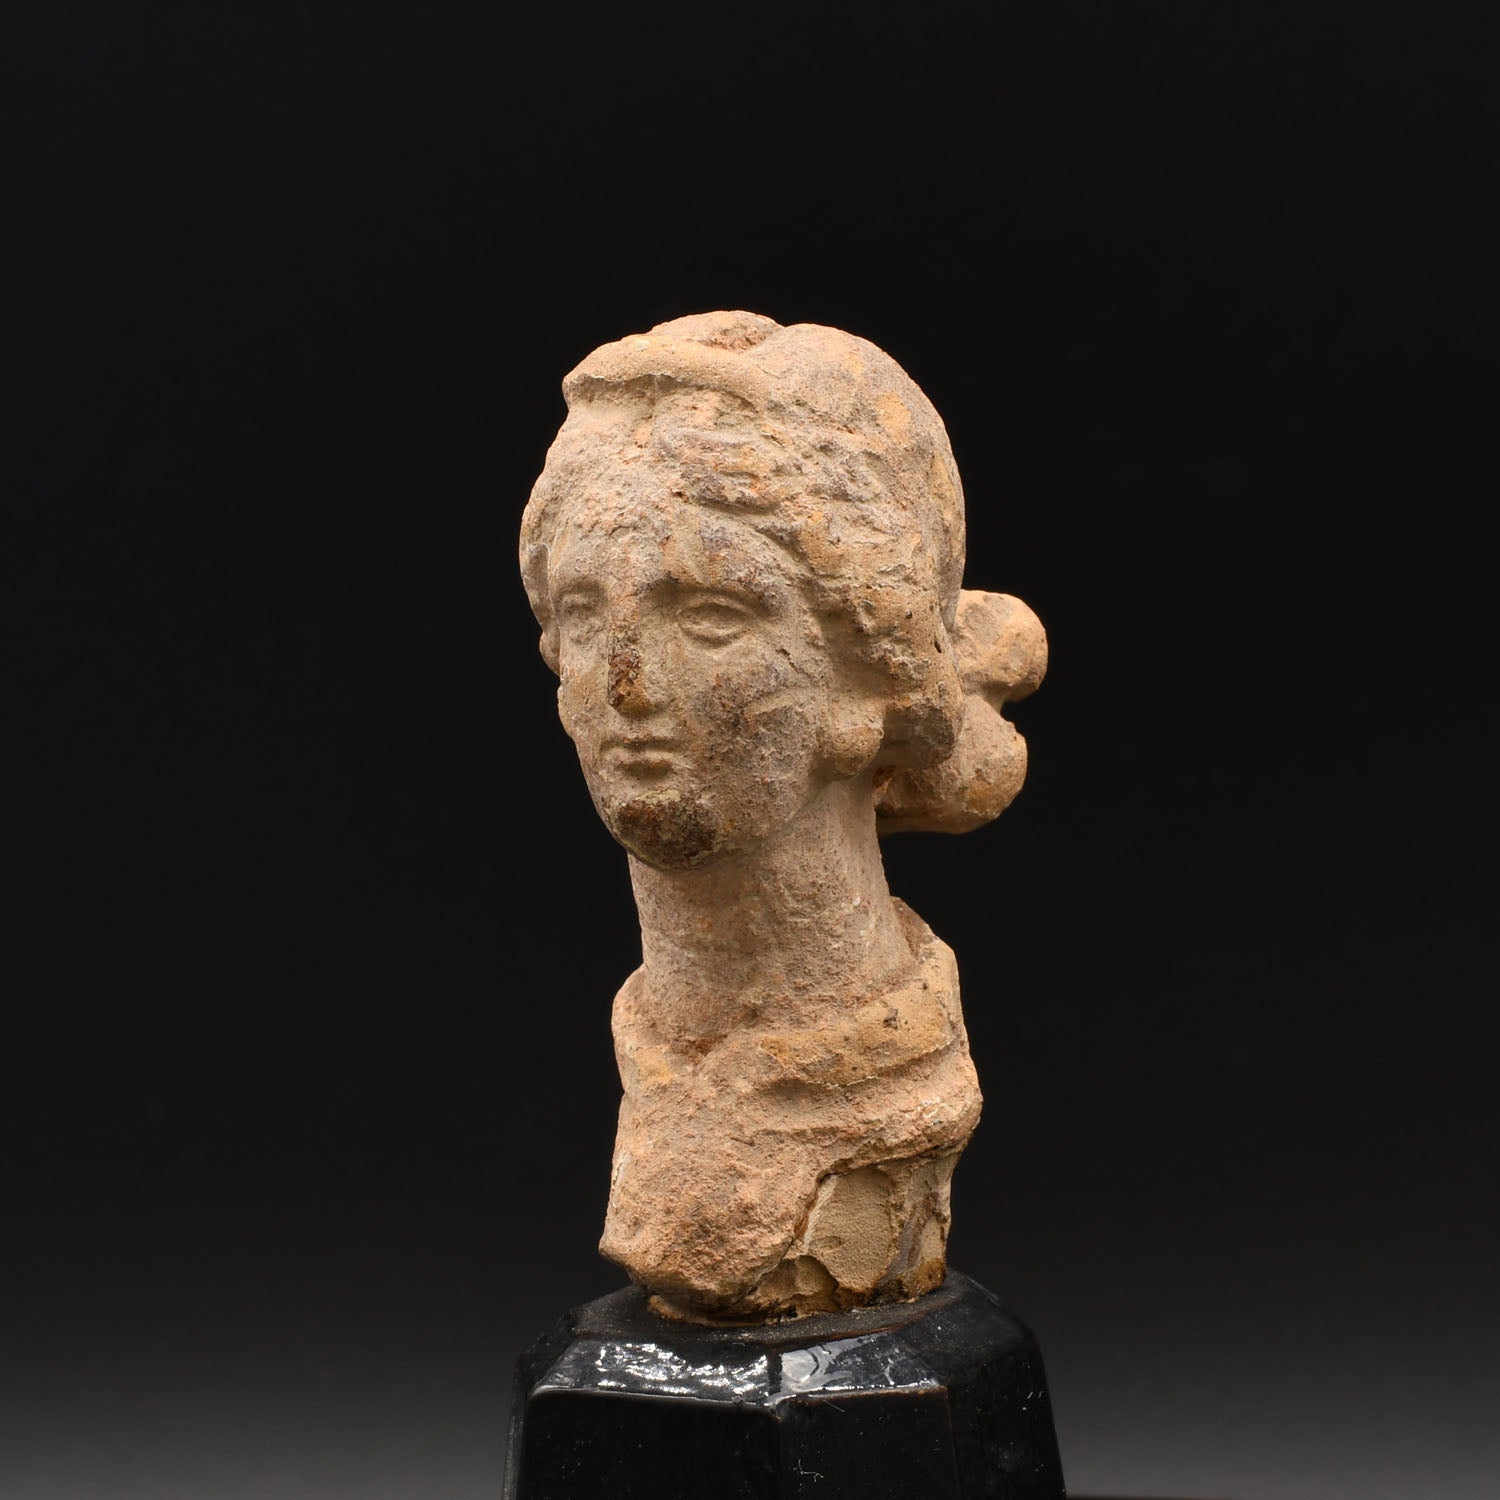 Head and neck of a woman, Hellenistic Period, ca. 2nd - 1st century BCE